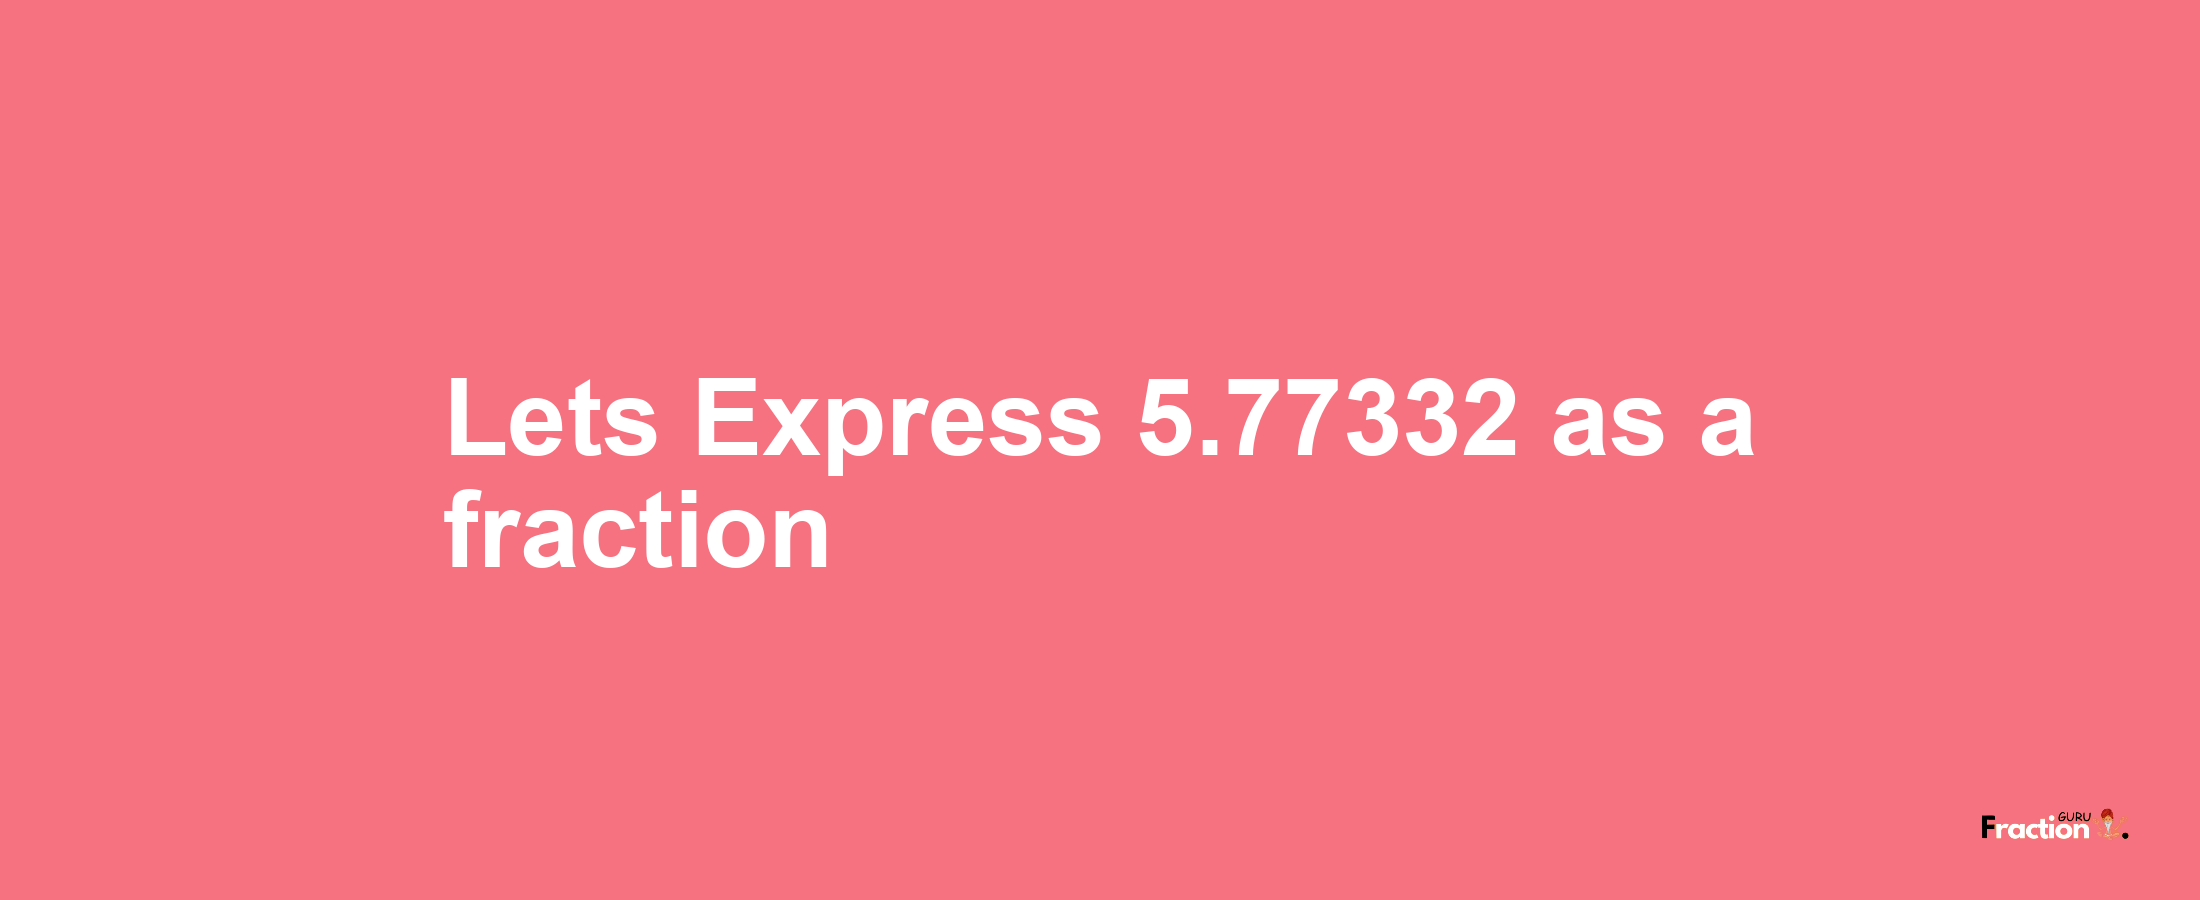 Lets Express 5.77332 as afraction